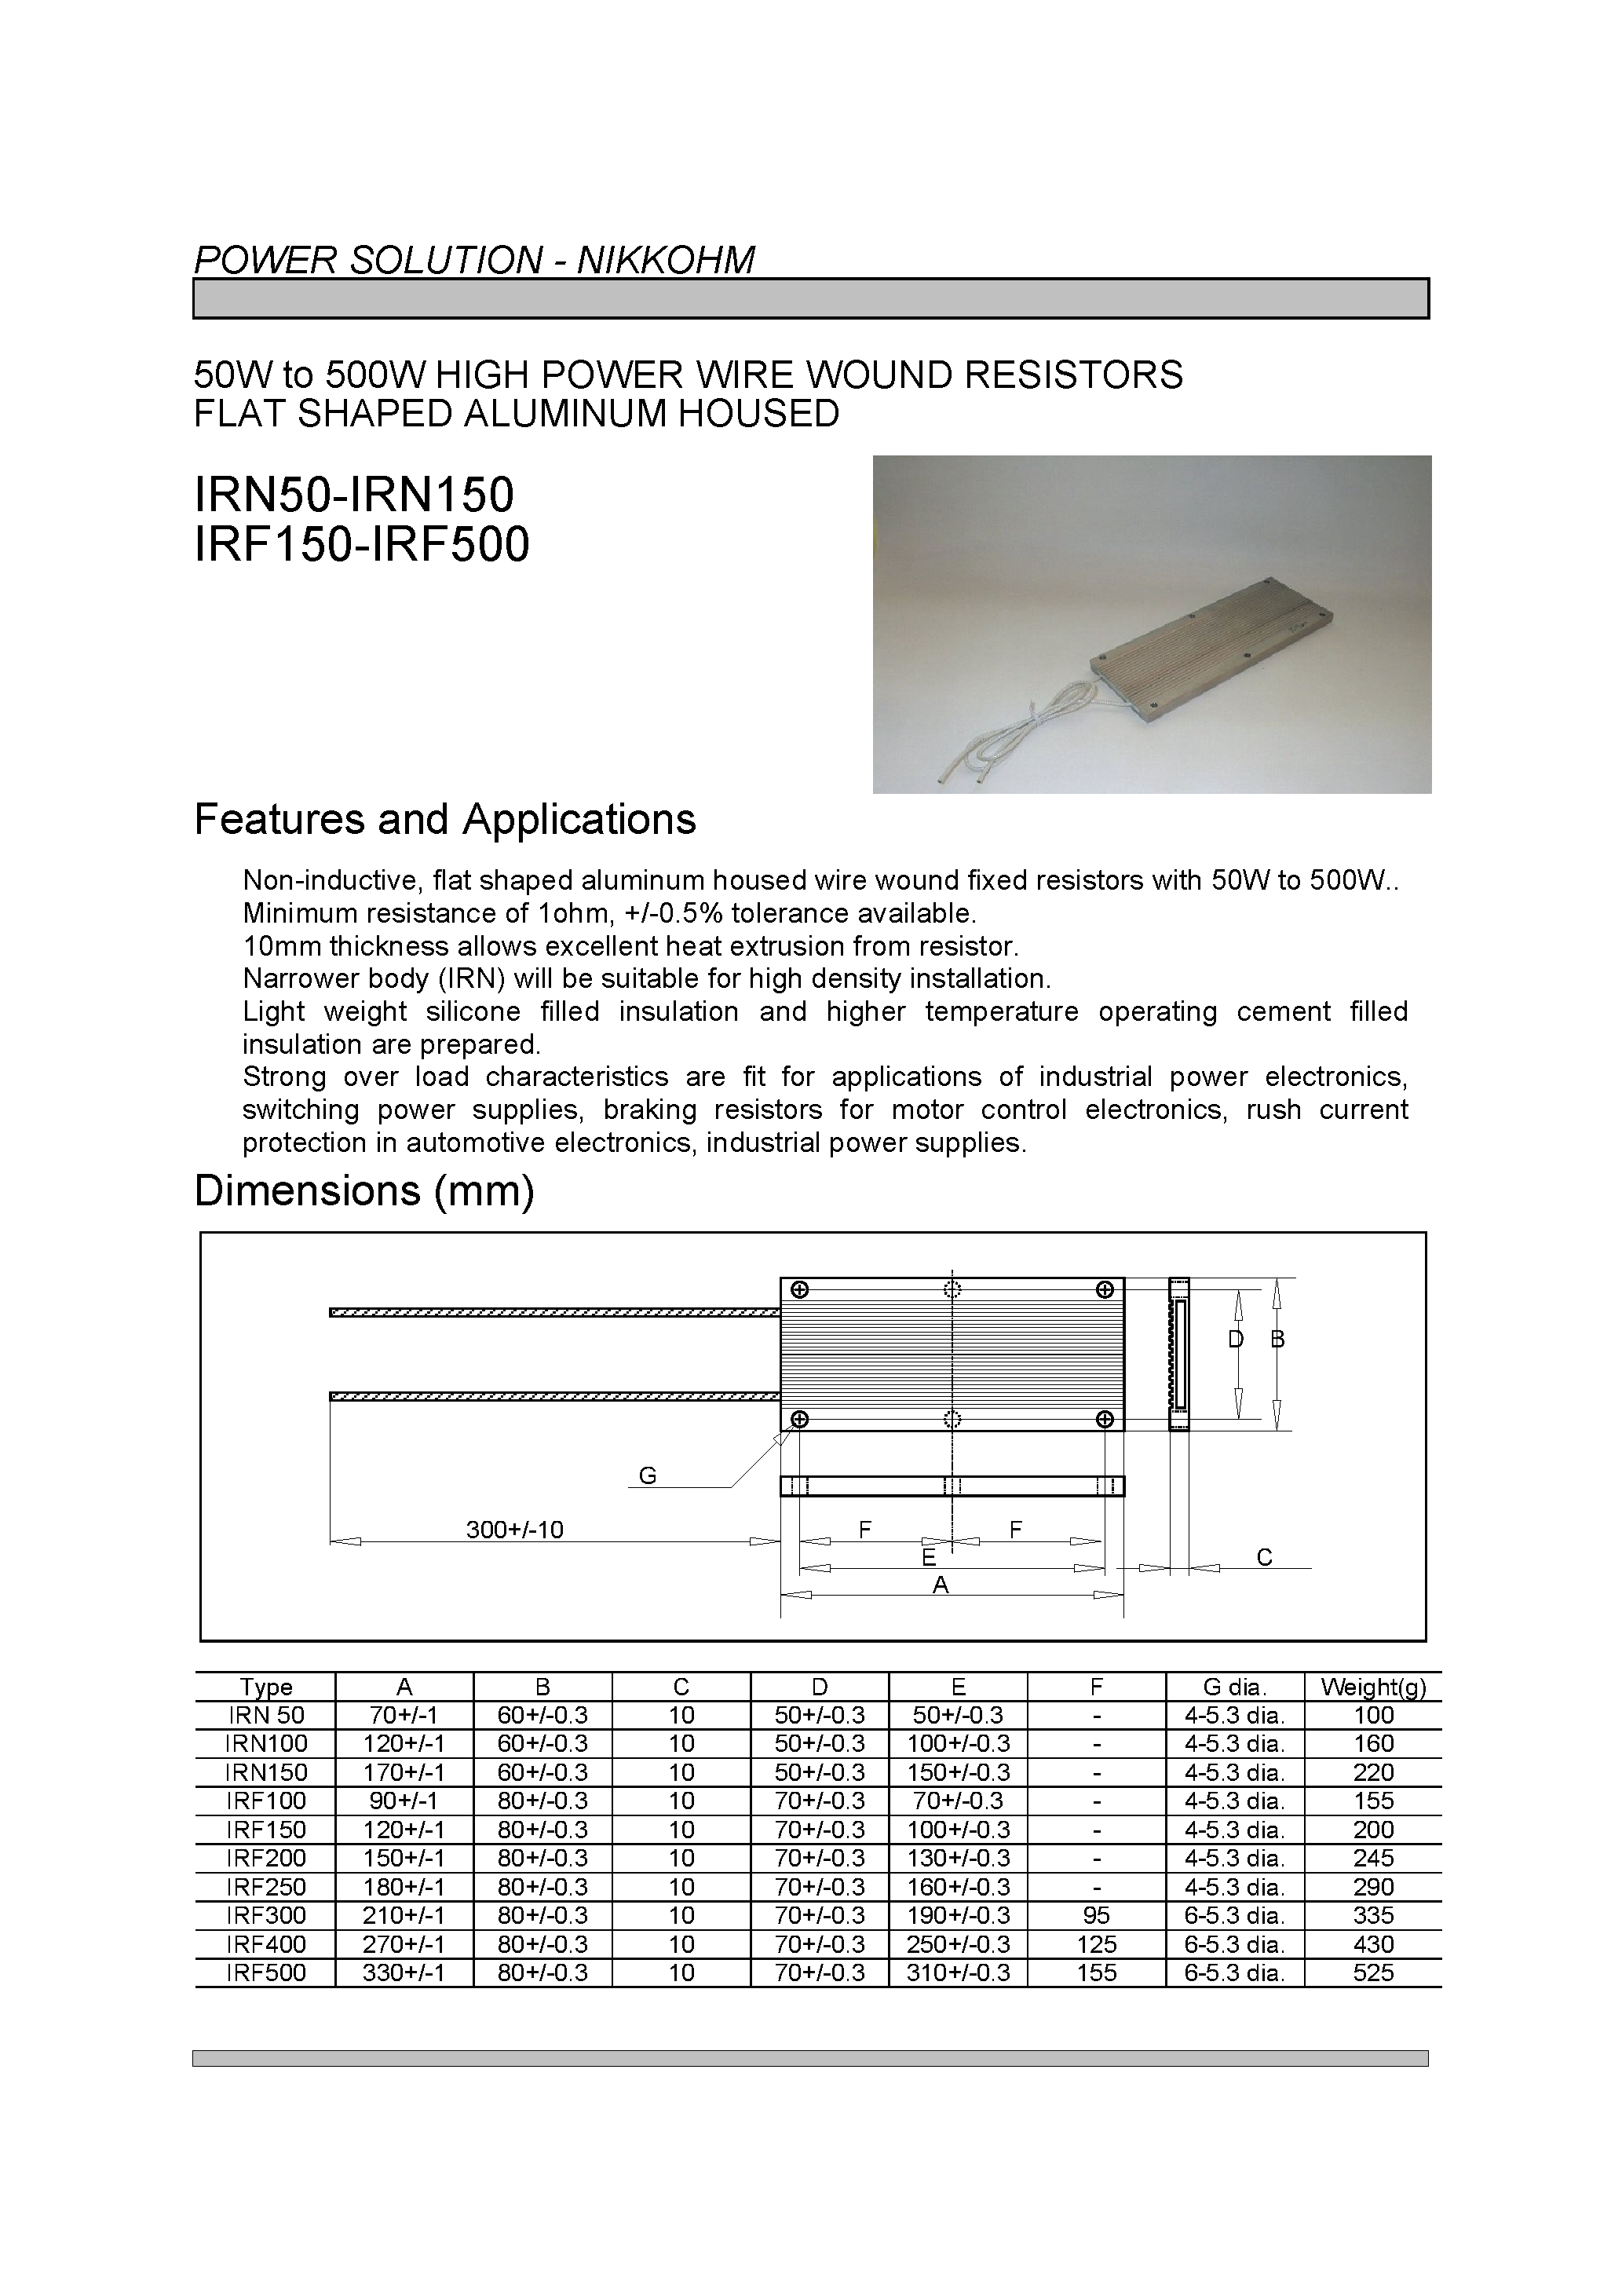 Datasheet IRF100 - (IRF150 - IRF500) 50W to 500W HIGH POWER WIRE WOUND RESISTORS FLAT SHAPED ALUMINUM HOUSED page 1